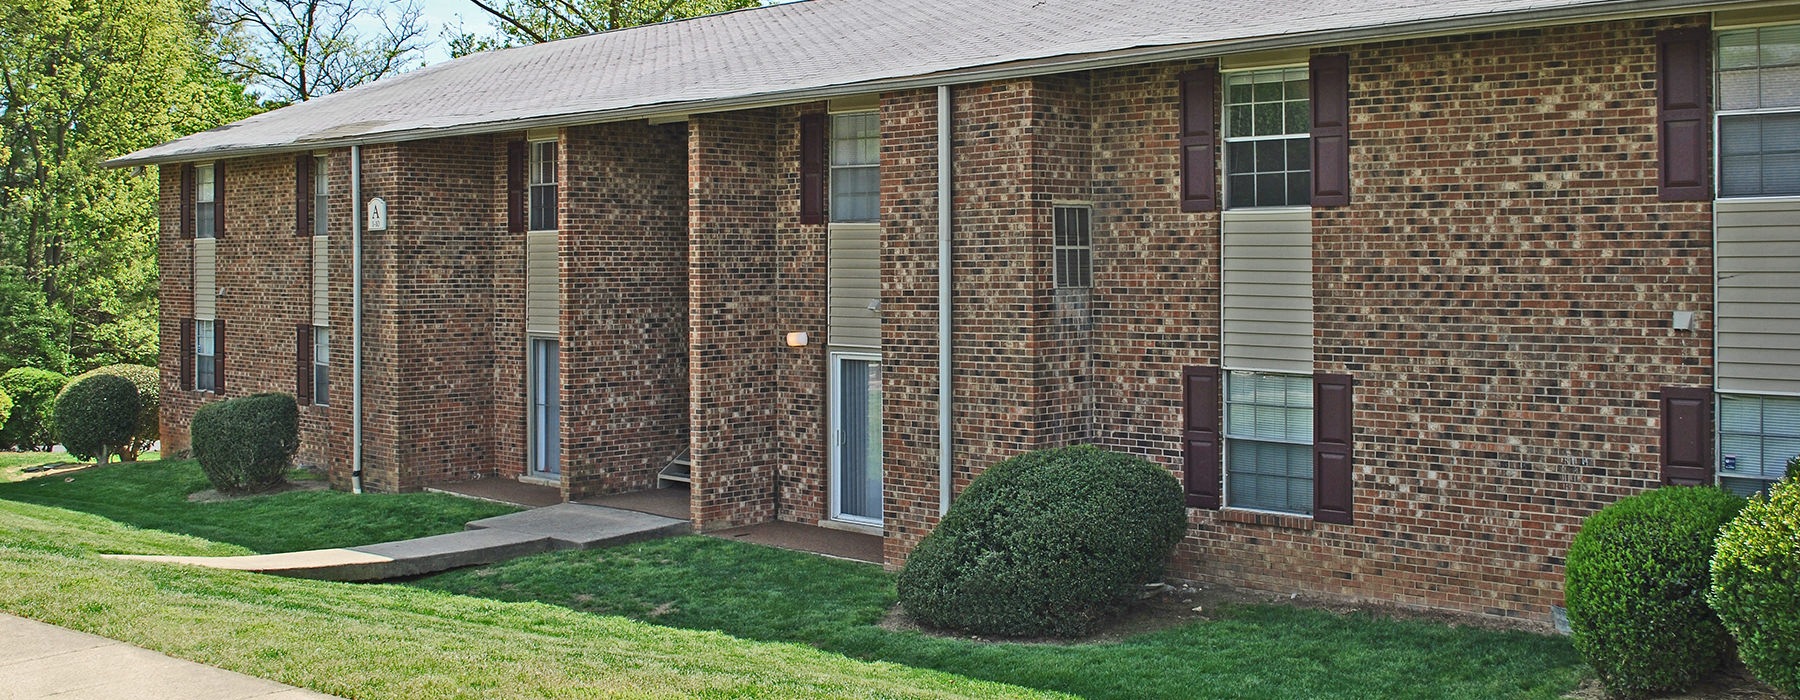 Carolina Apartments is a two-story apartment complex